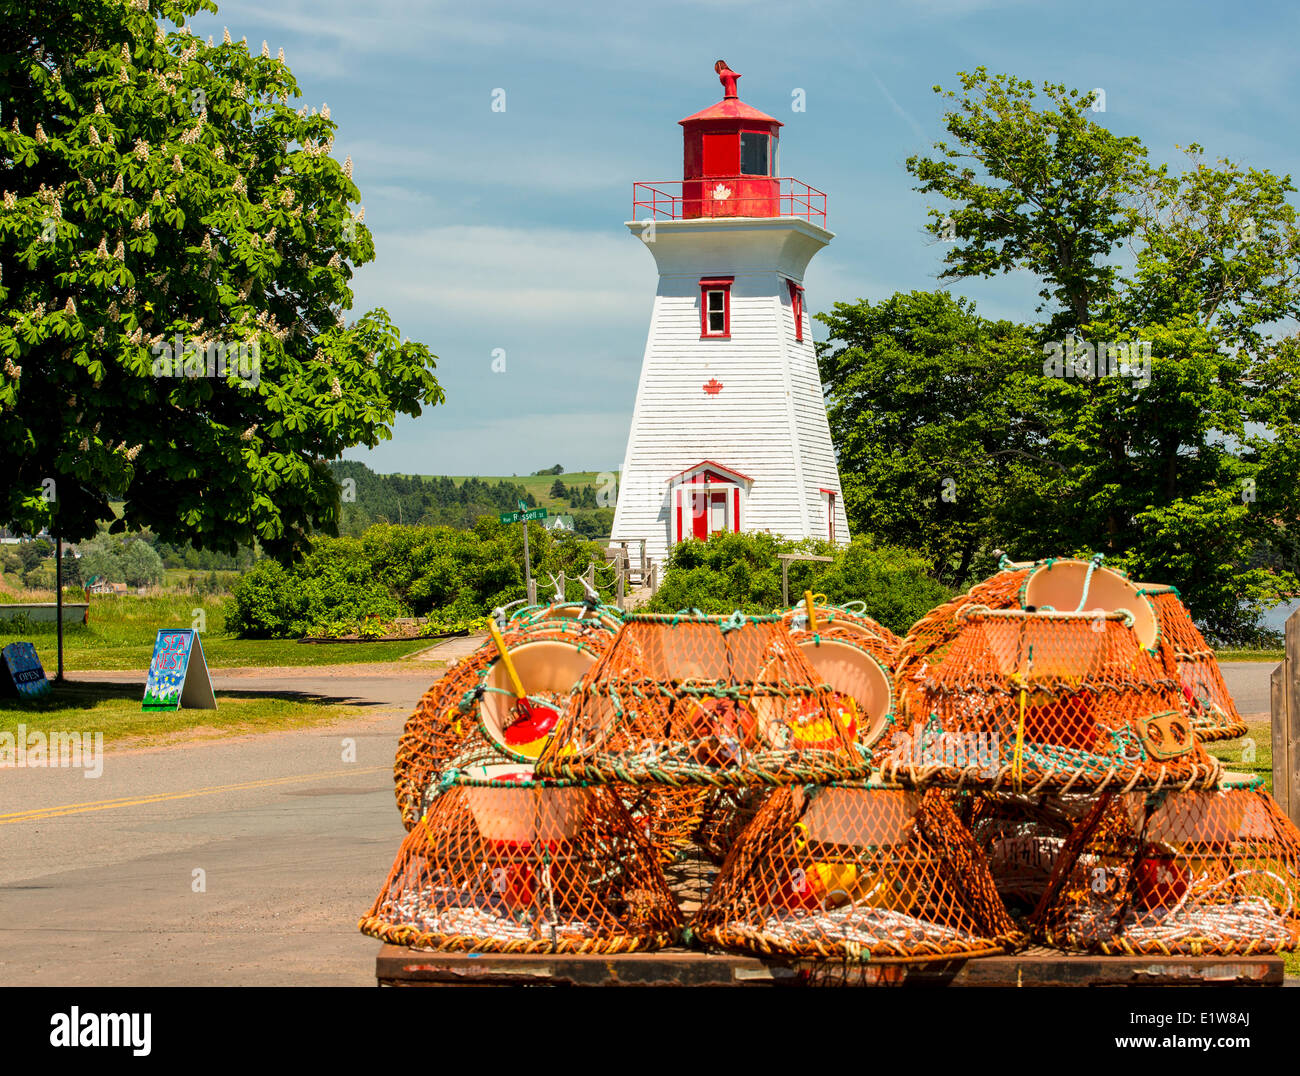 Lighthouse and crab traps, Victoria, Prince Edward Island, Canada Stock Photo